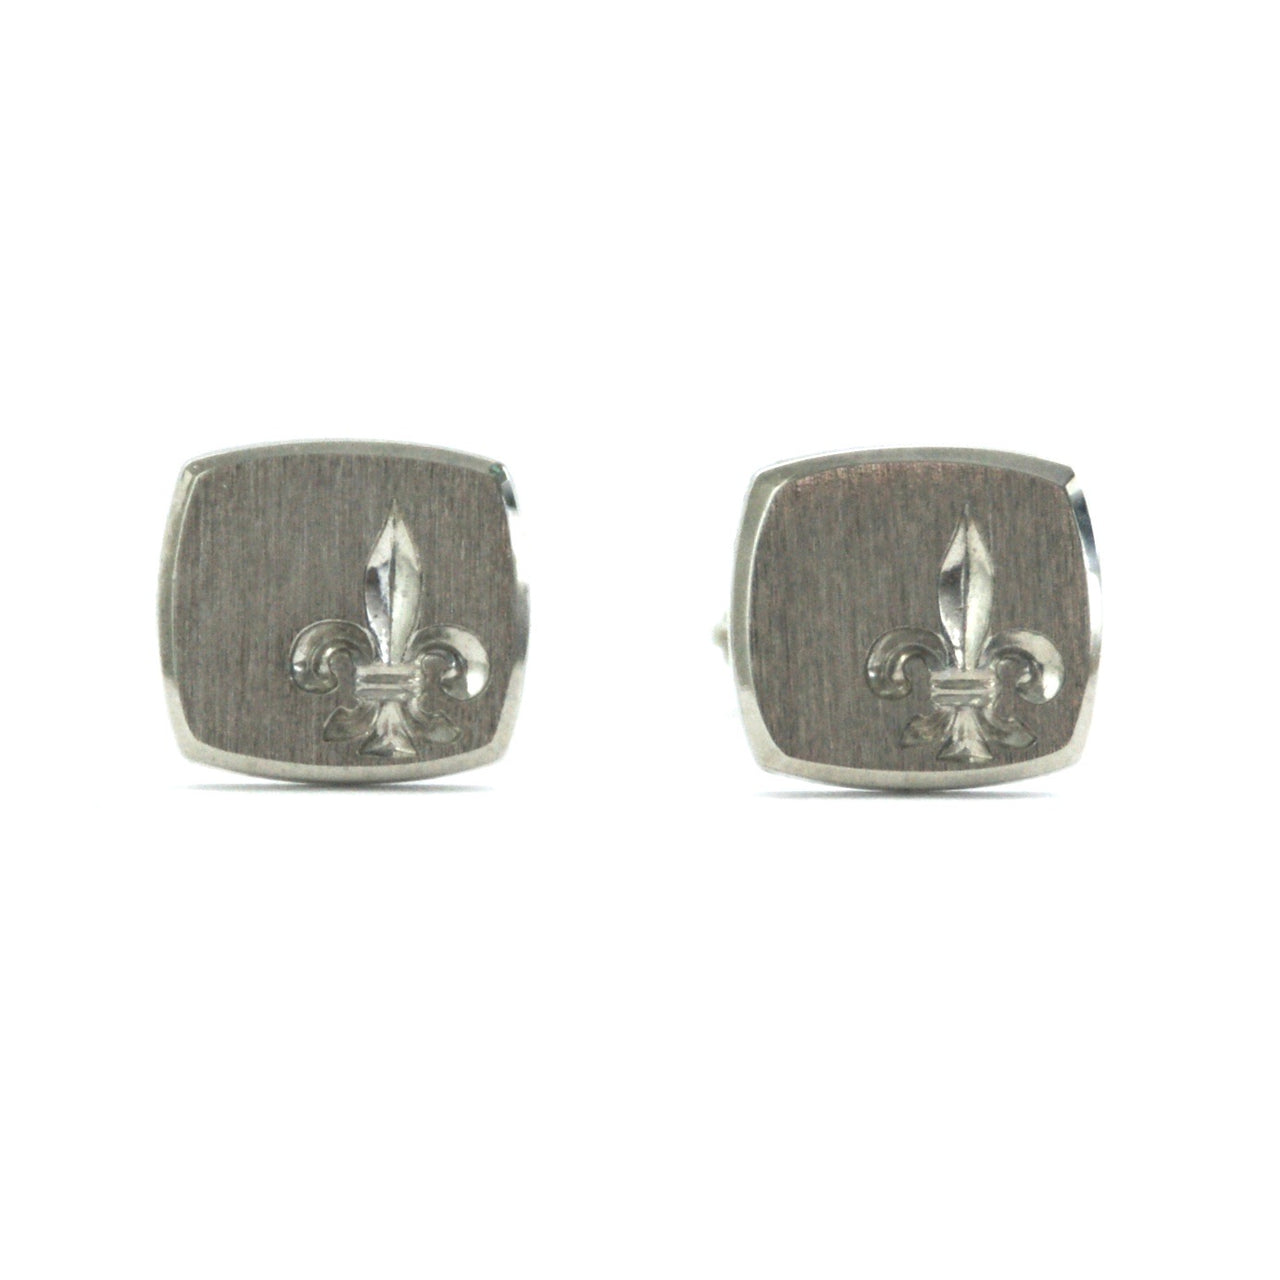 Fathers Day gift, fathers day, cufflinks,